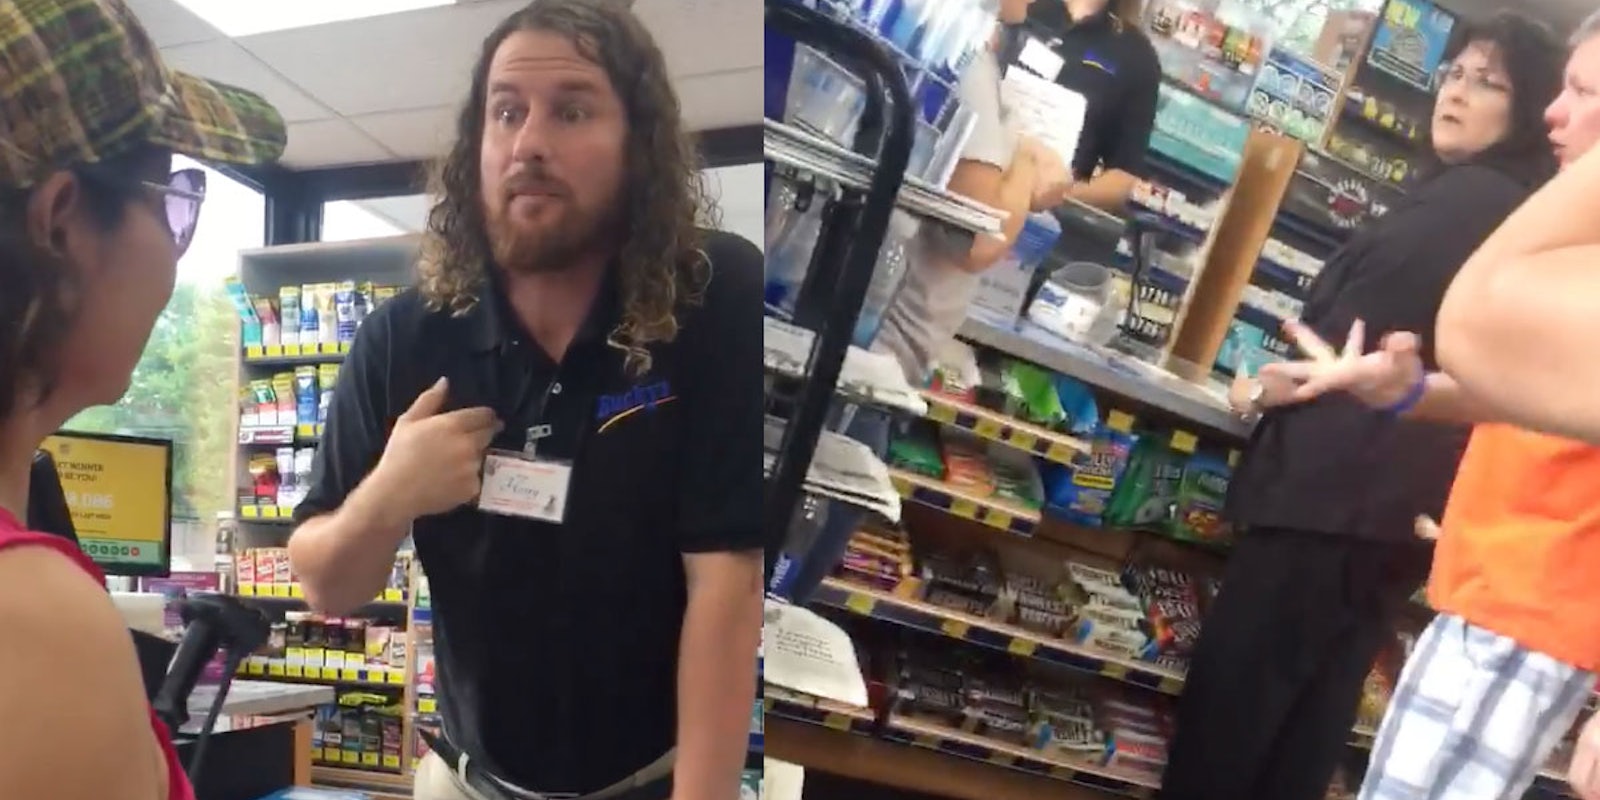 On the left, the employee is seen saying 'I'm an American' to two women speaking Spanish; on the right, two bystander customers defend the racist cashier